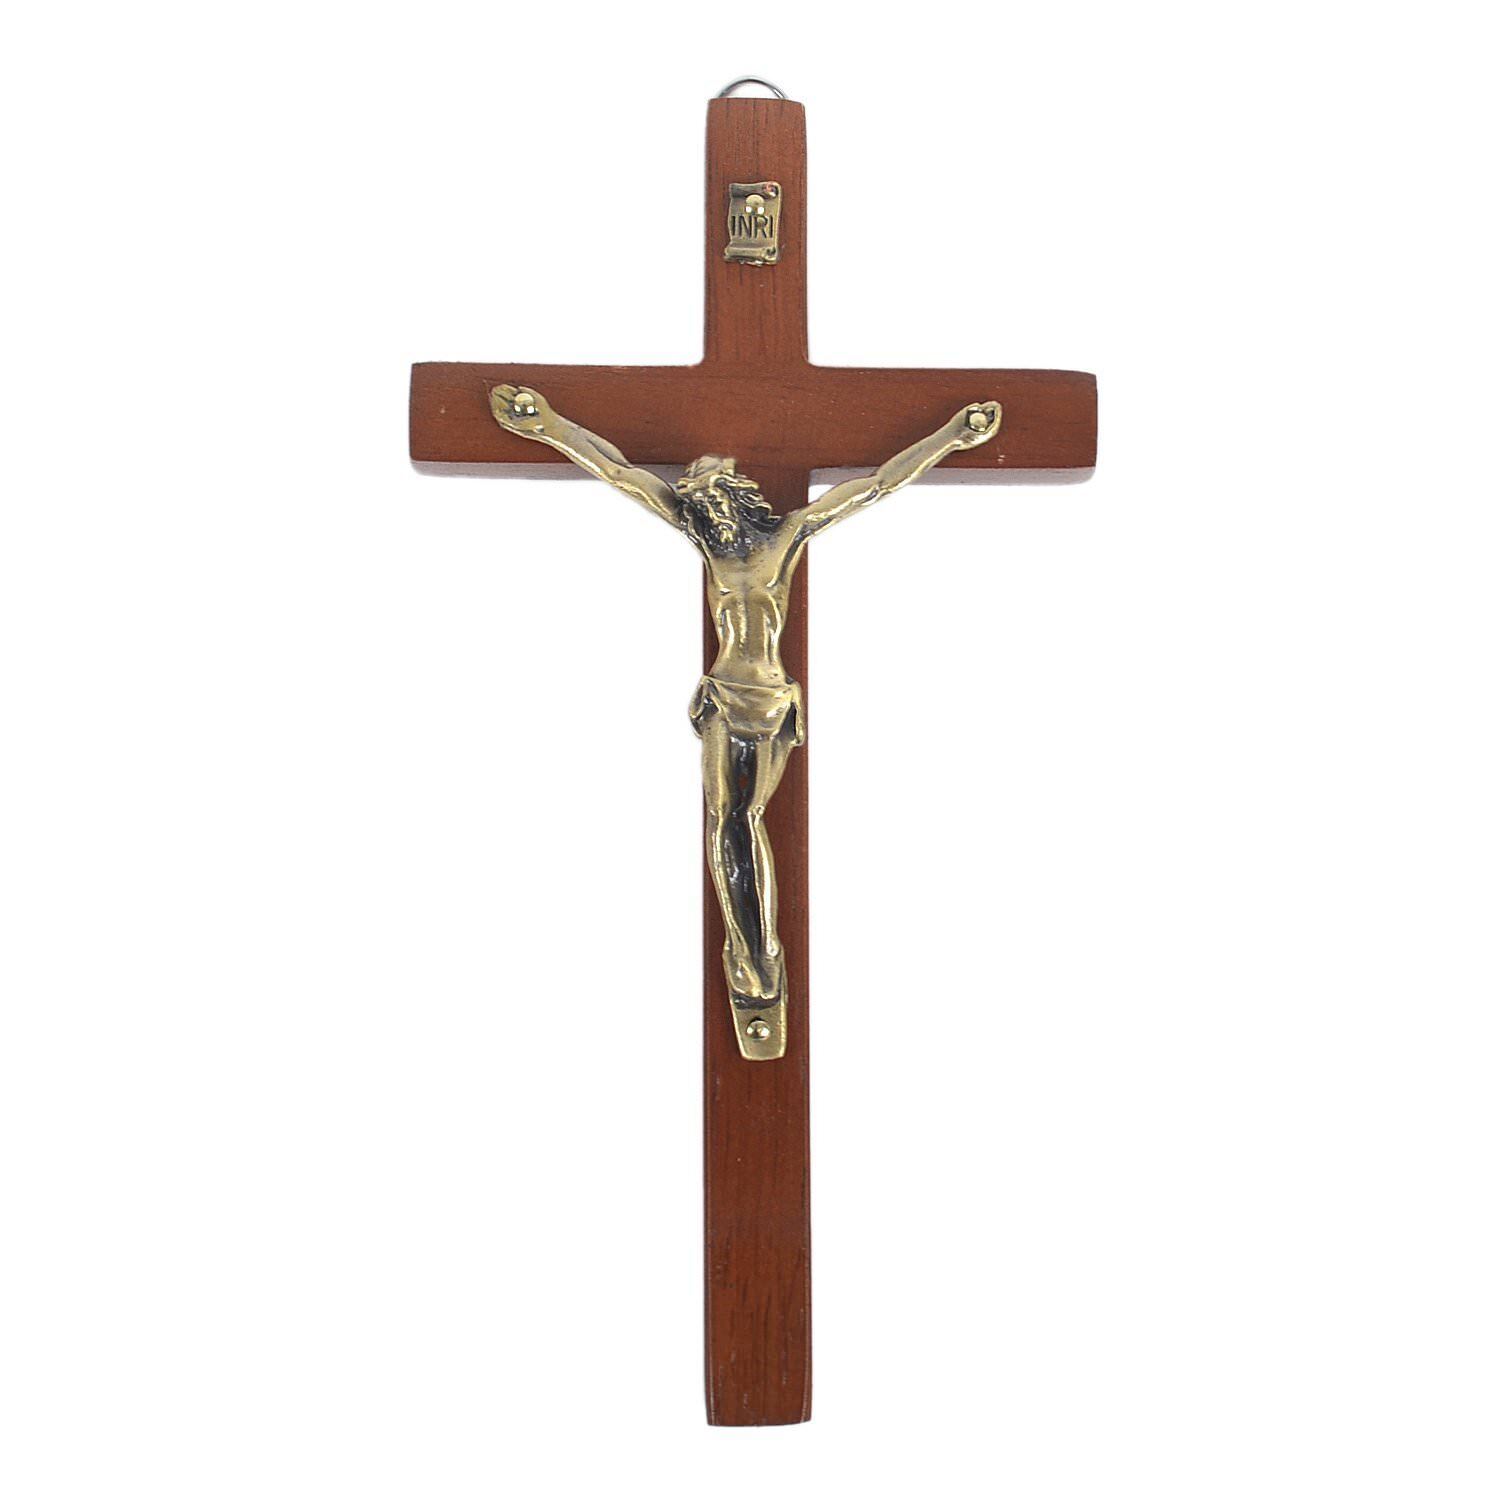 Vintage Wooden Metal Wall Cross Crucifix Holy Religious Carved Christ Brown